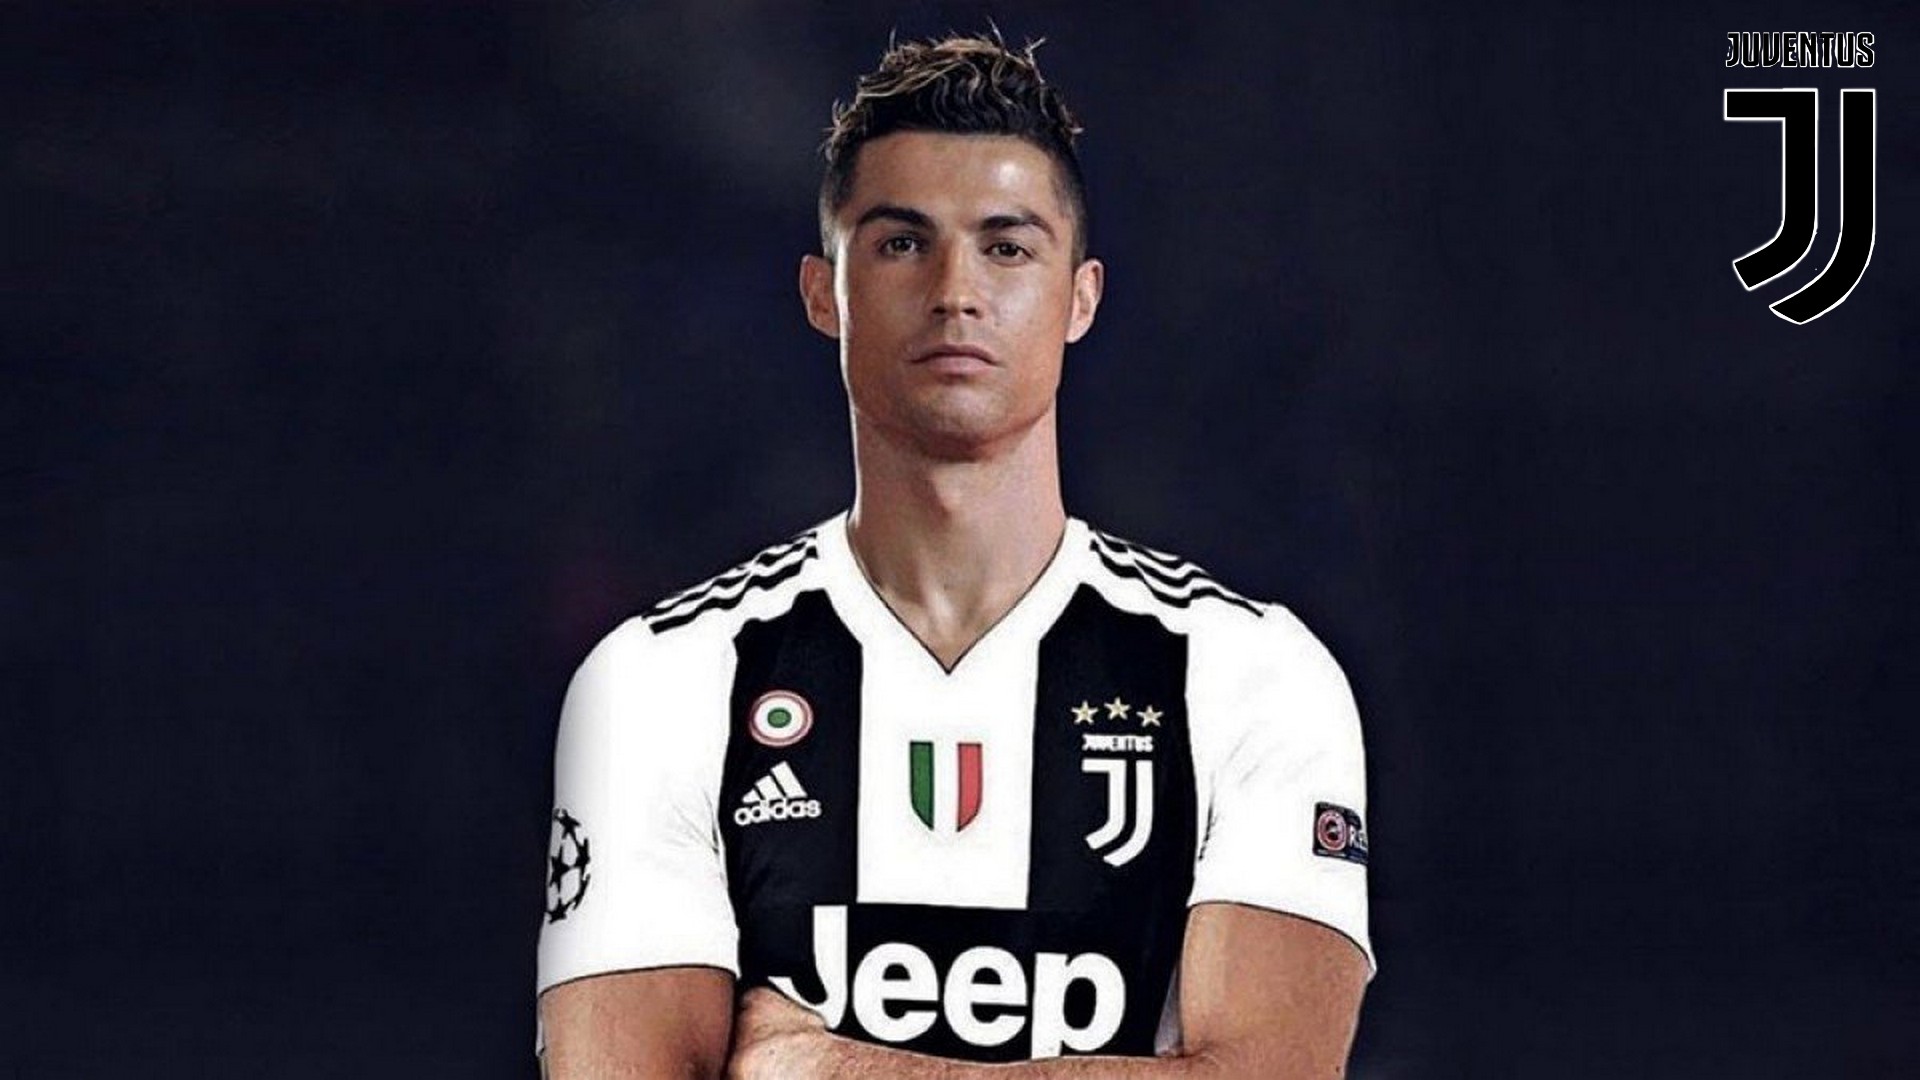 Christiano Ronaldo Juventus Wallpaper with resolution 1920x1080 pixel. You can make this wallpaper for your Mac or Windows Desktop Background, iPhone, Android or Tablet and another Smartphone device